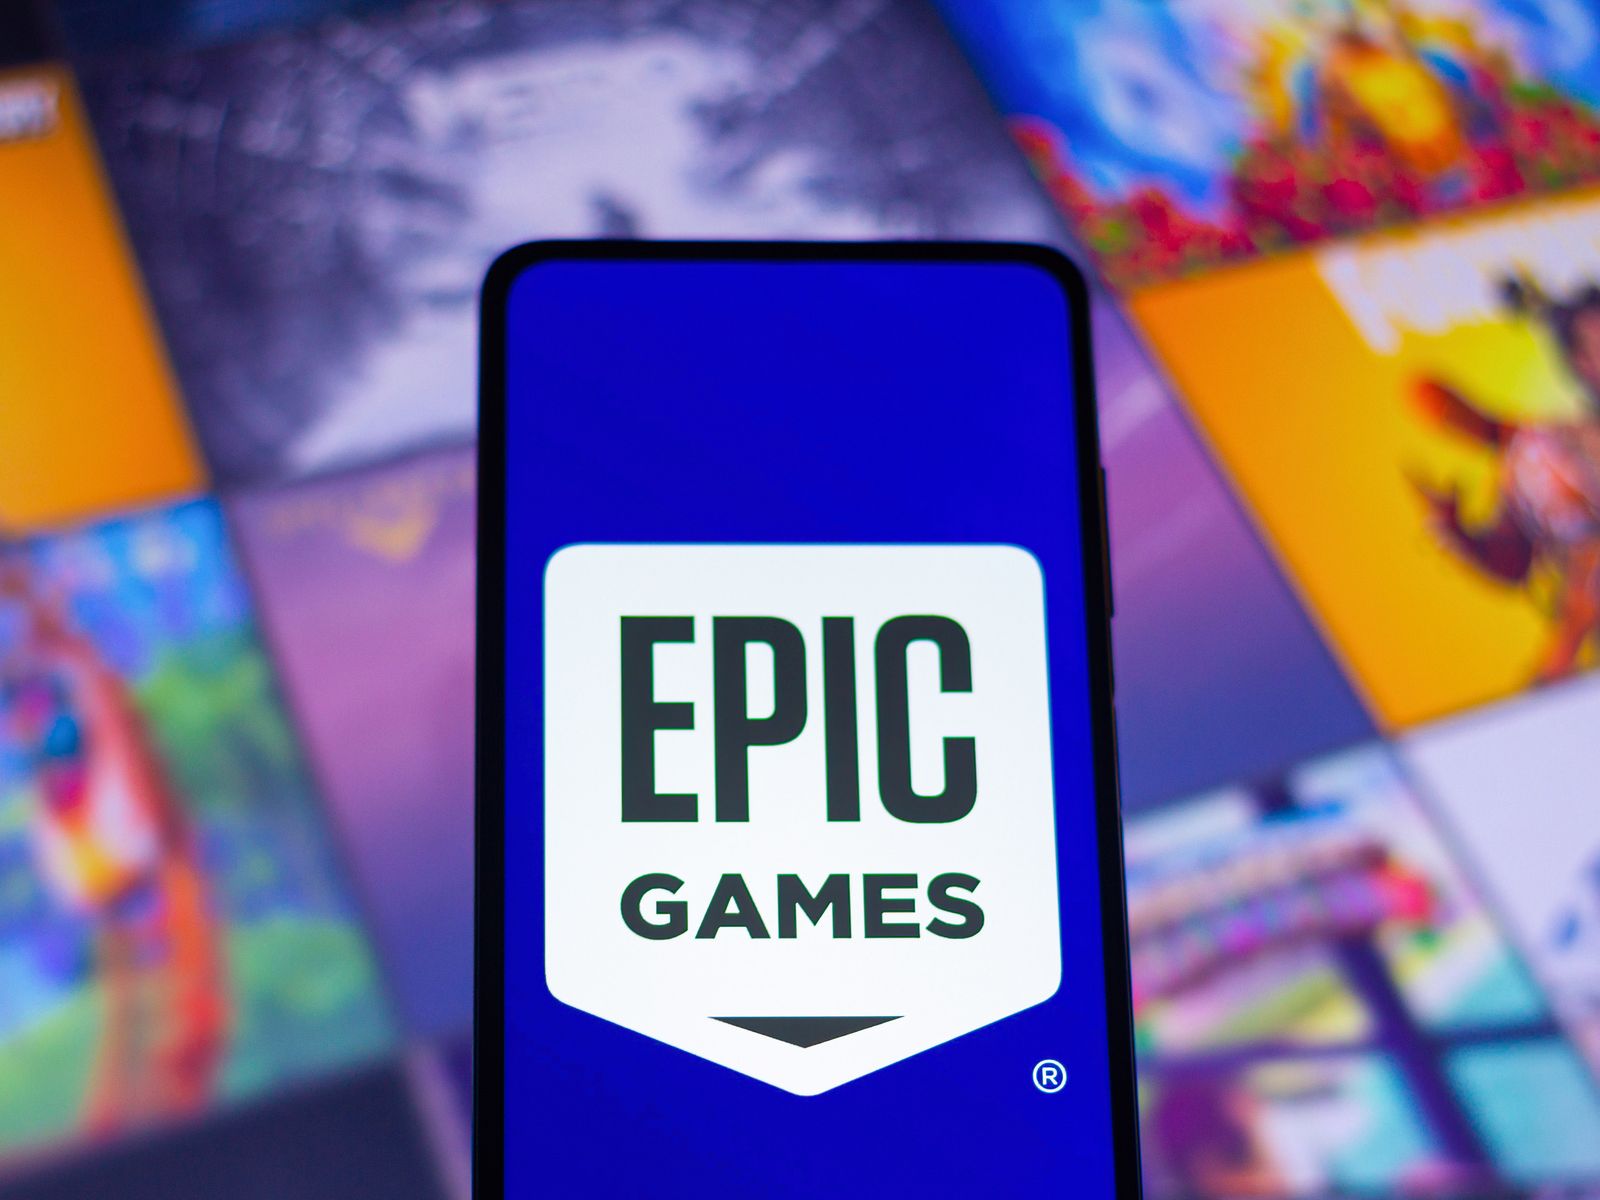 Epic Games has plans to launch its own Android game store in 2019